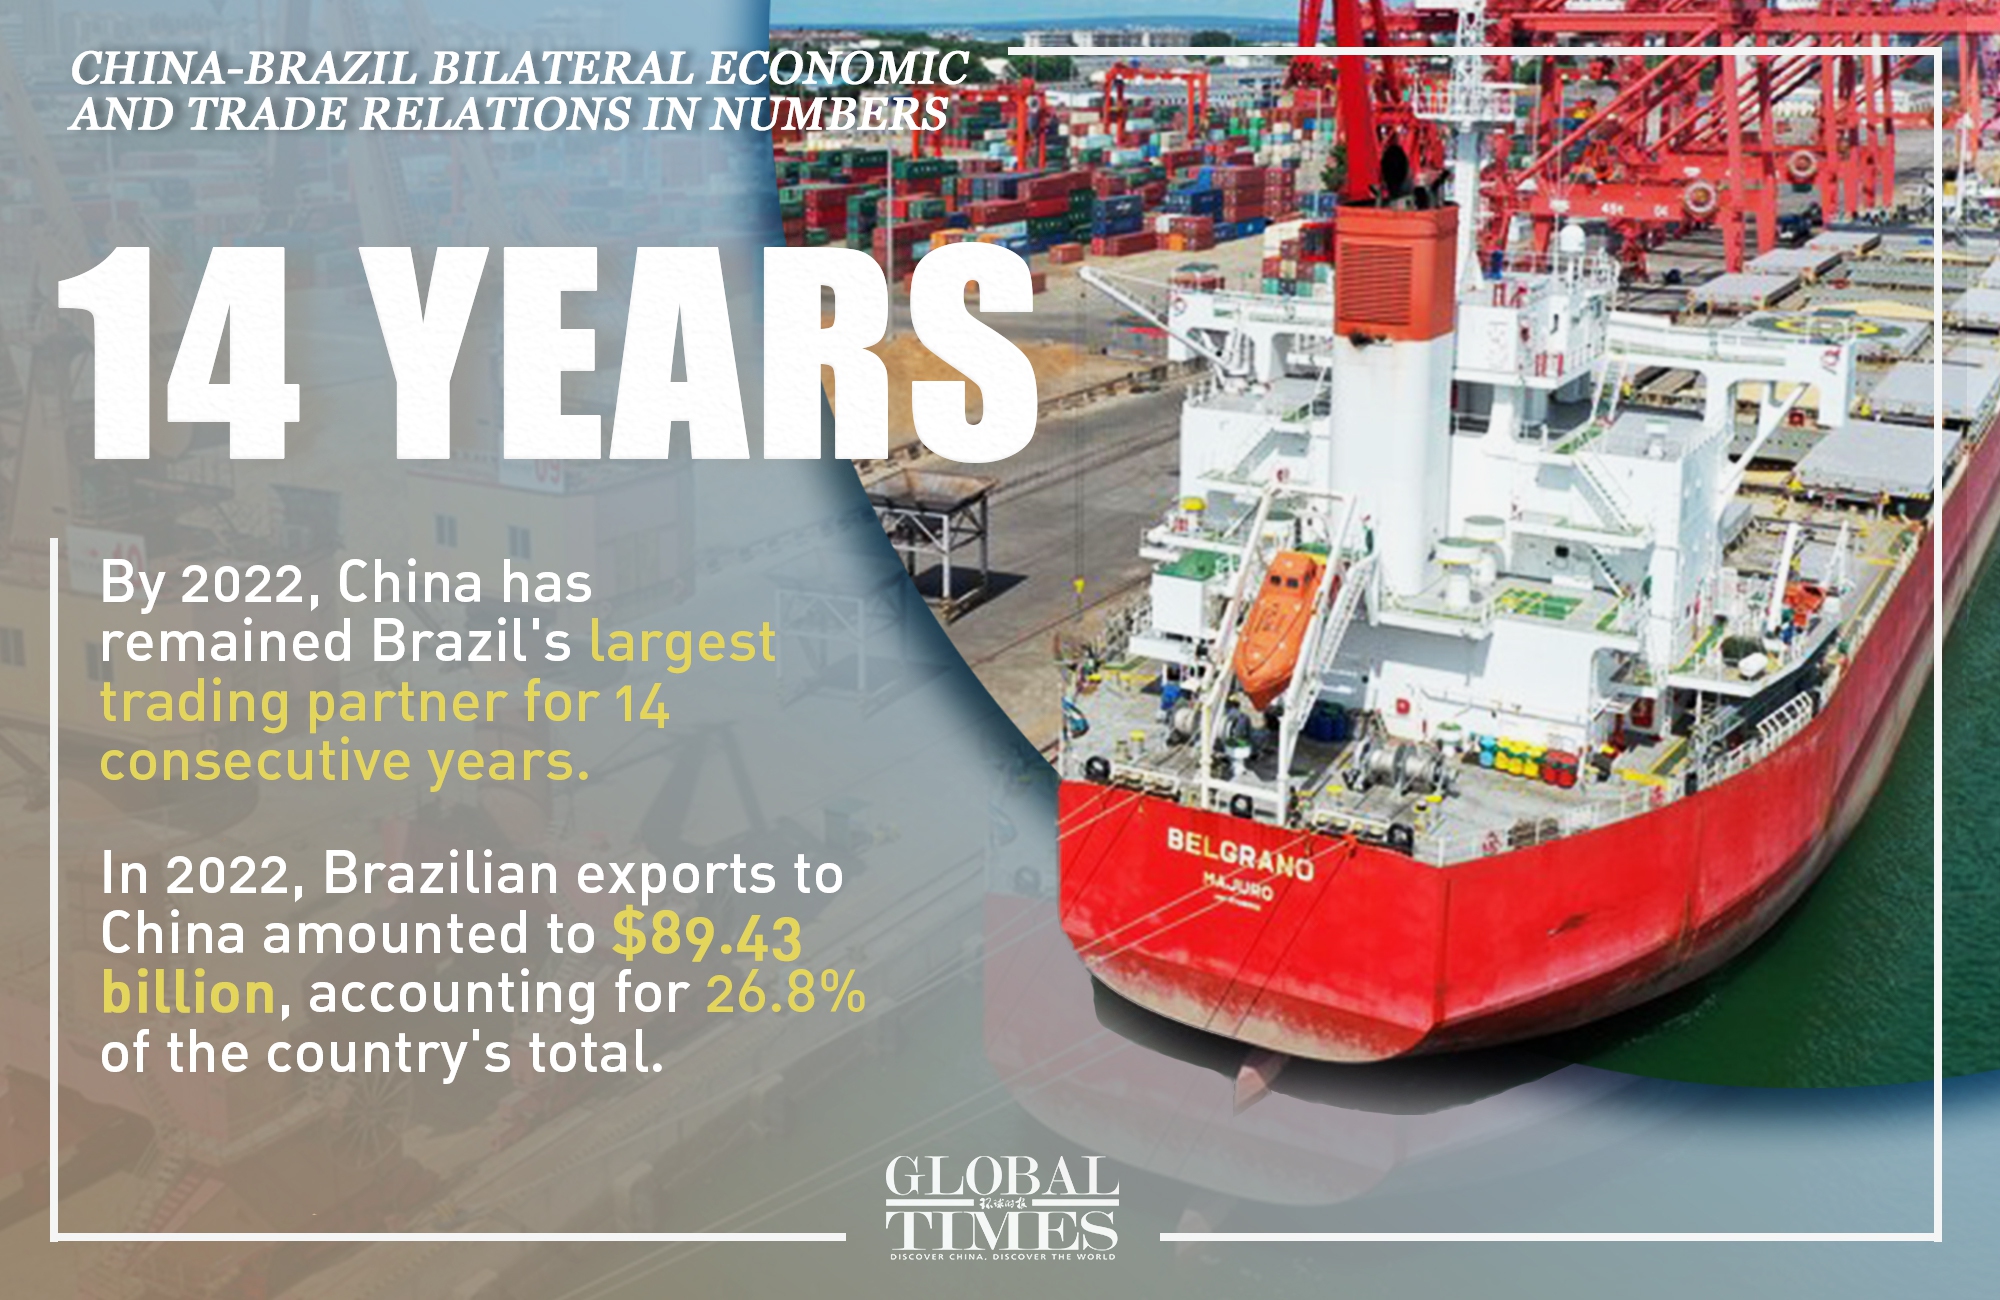 By 2022, China had been #Brazil's largest trading partner for 14 consecutive years, and the bilateral trade had exceeded $100 bln in the previous 5 years. Check out China-Brazil economic and trade relations in numbers: